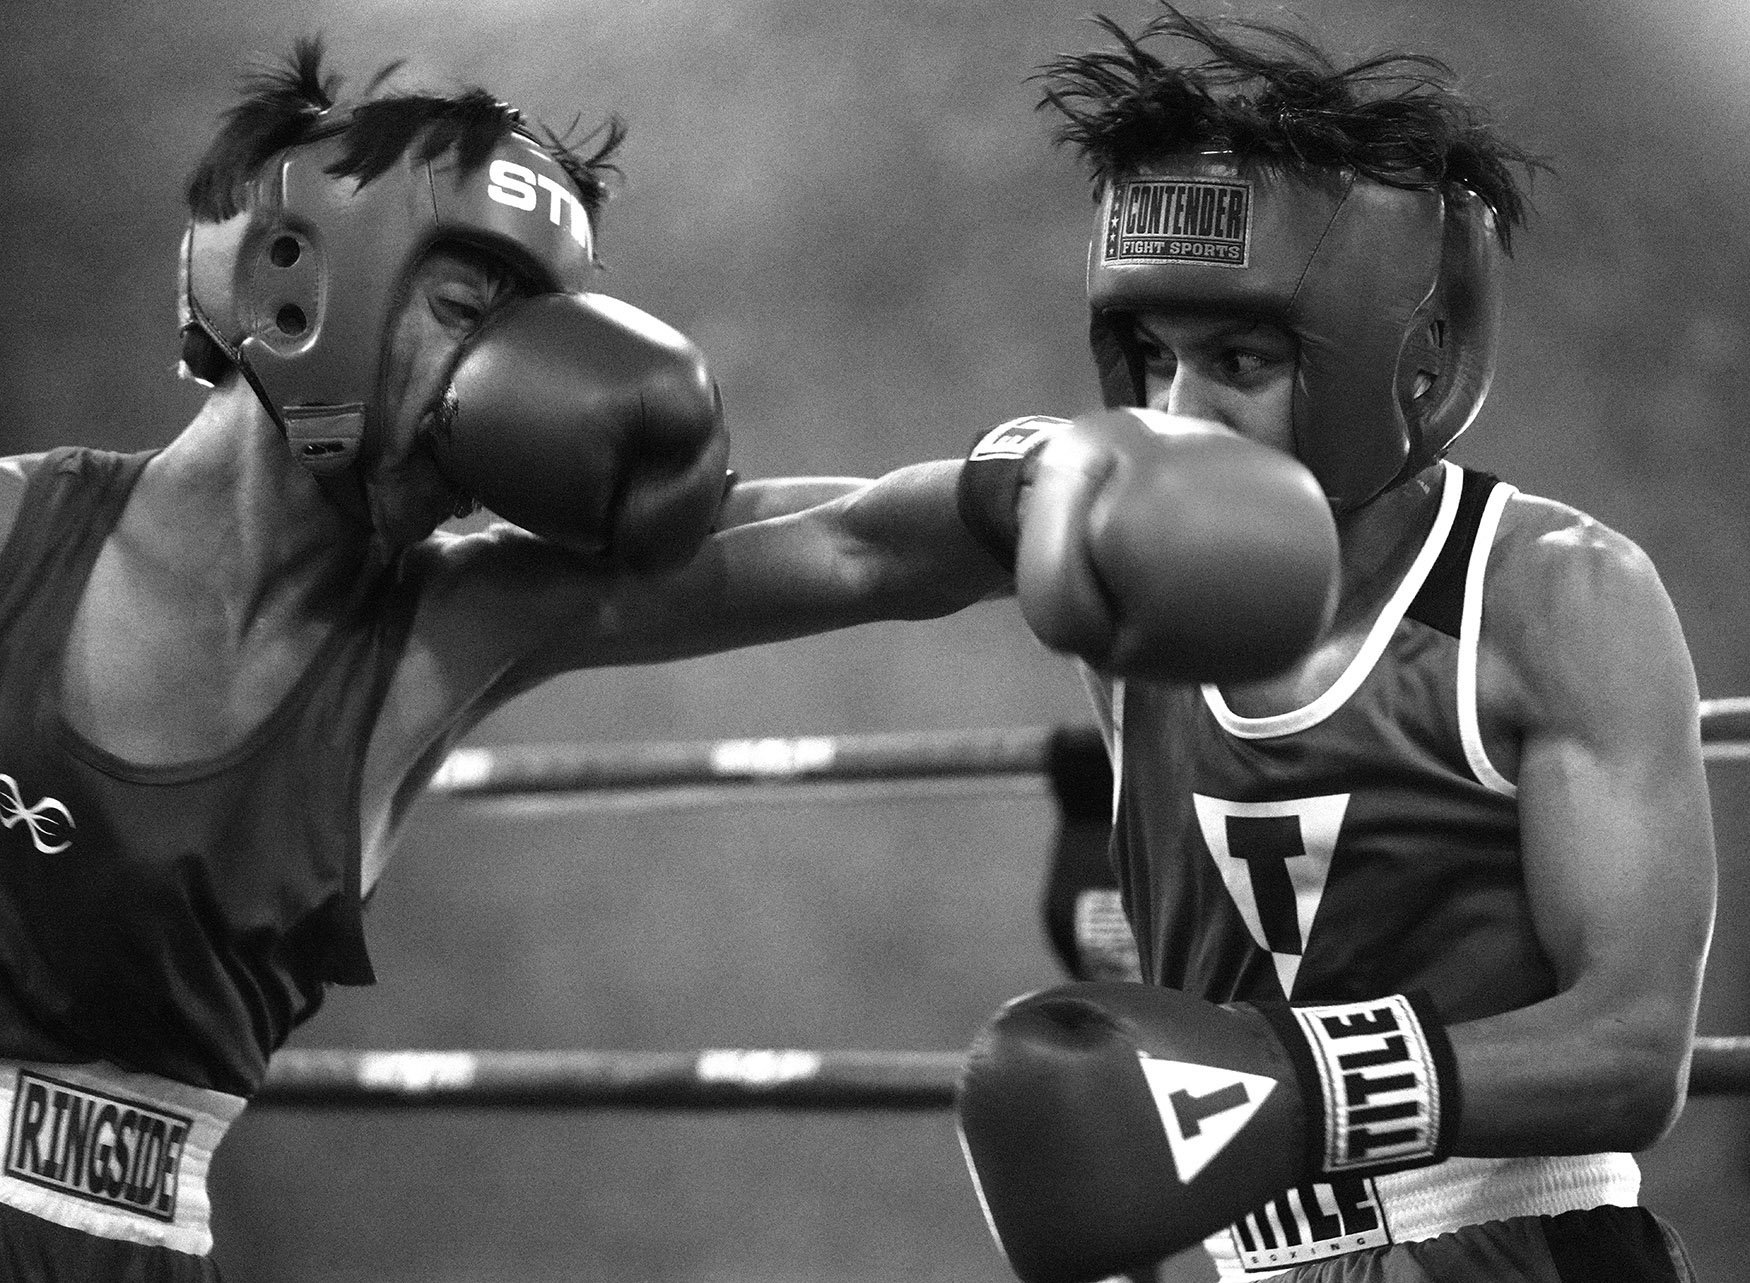  Fourteen year-olds Miguel Rosales Jr., right, of Real Castillo Boxing right, fights Marvin Gomez of Pasadena Boxing during the annual amateur boxing show staged by the Duarte Boxing Club at Duarte High School in Duarte on Saturday, August 13, 2022. 